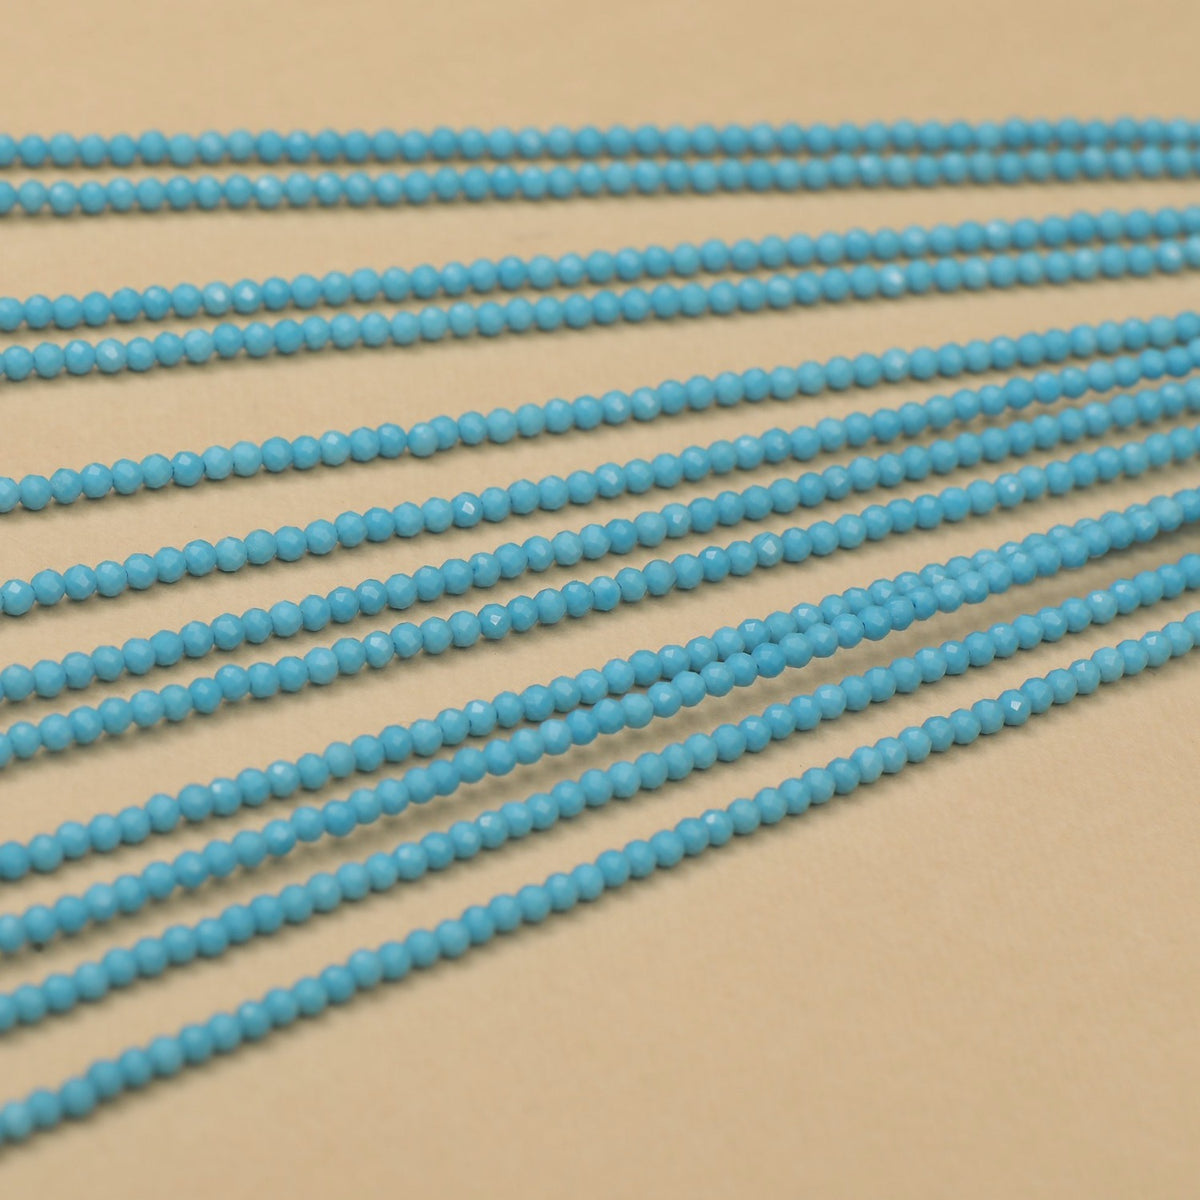 Chinese Turquoise Beads- Sold Per Stand